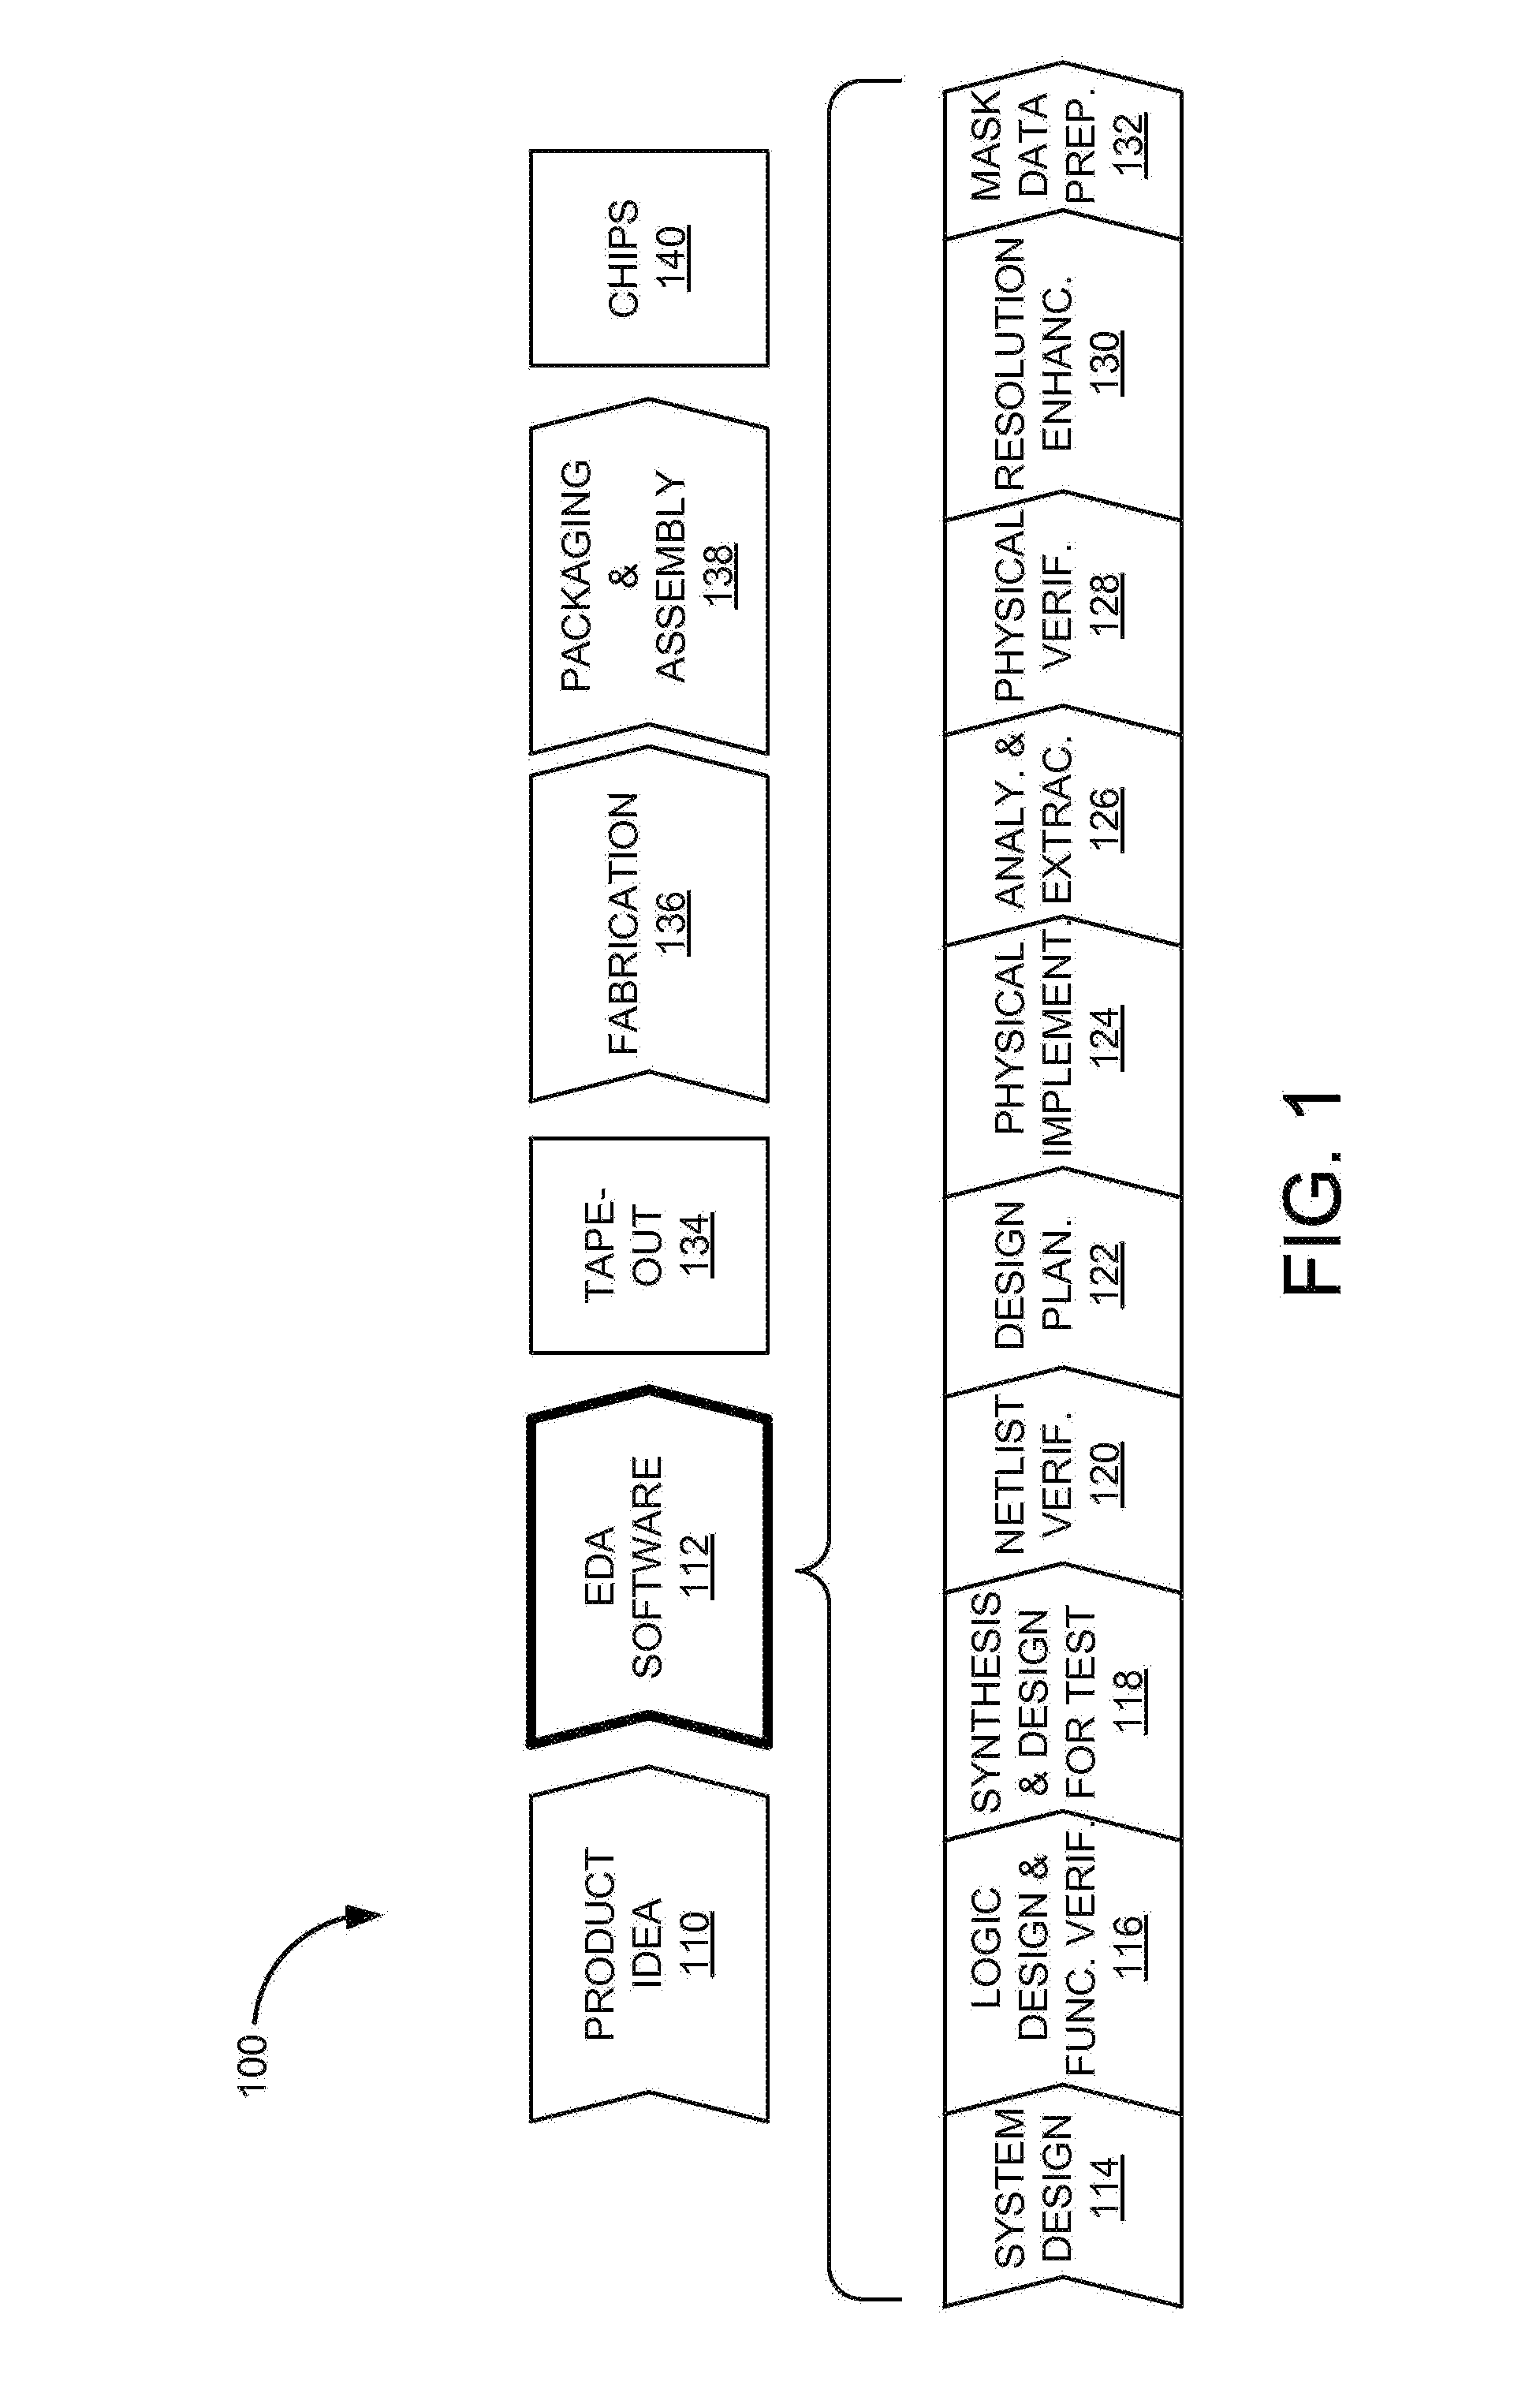 Method for organizing, controlling, and reporting on design mismatch information in IC physical design data